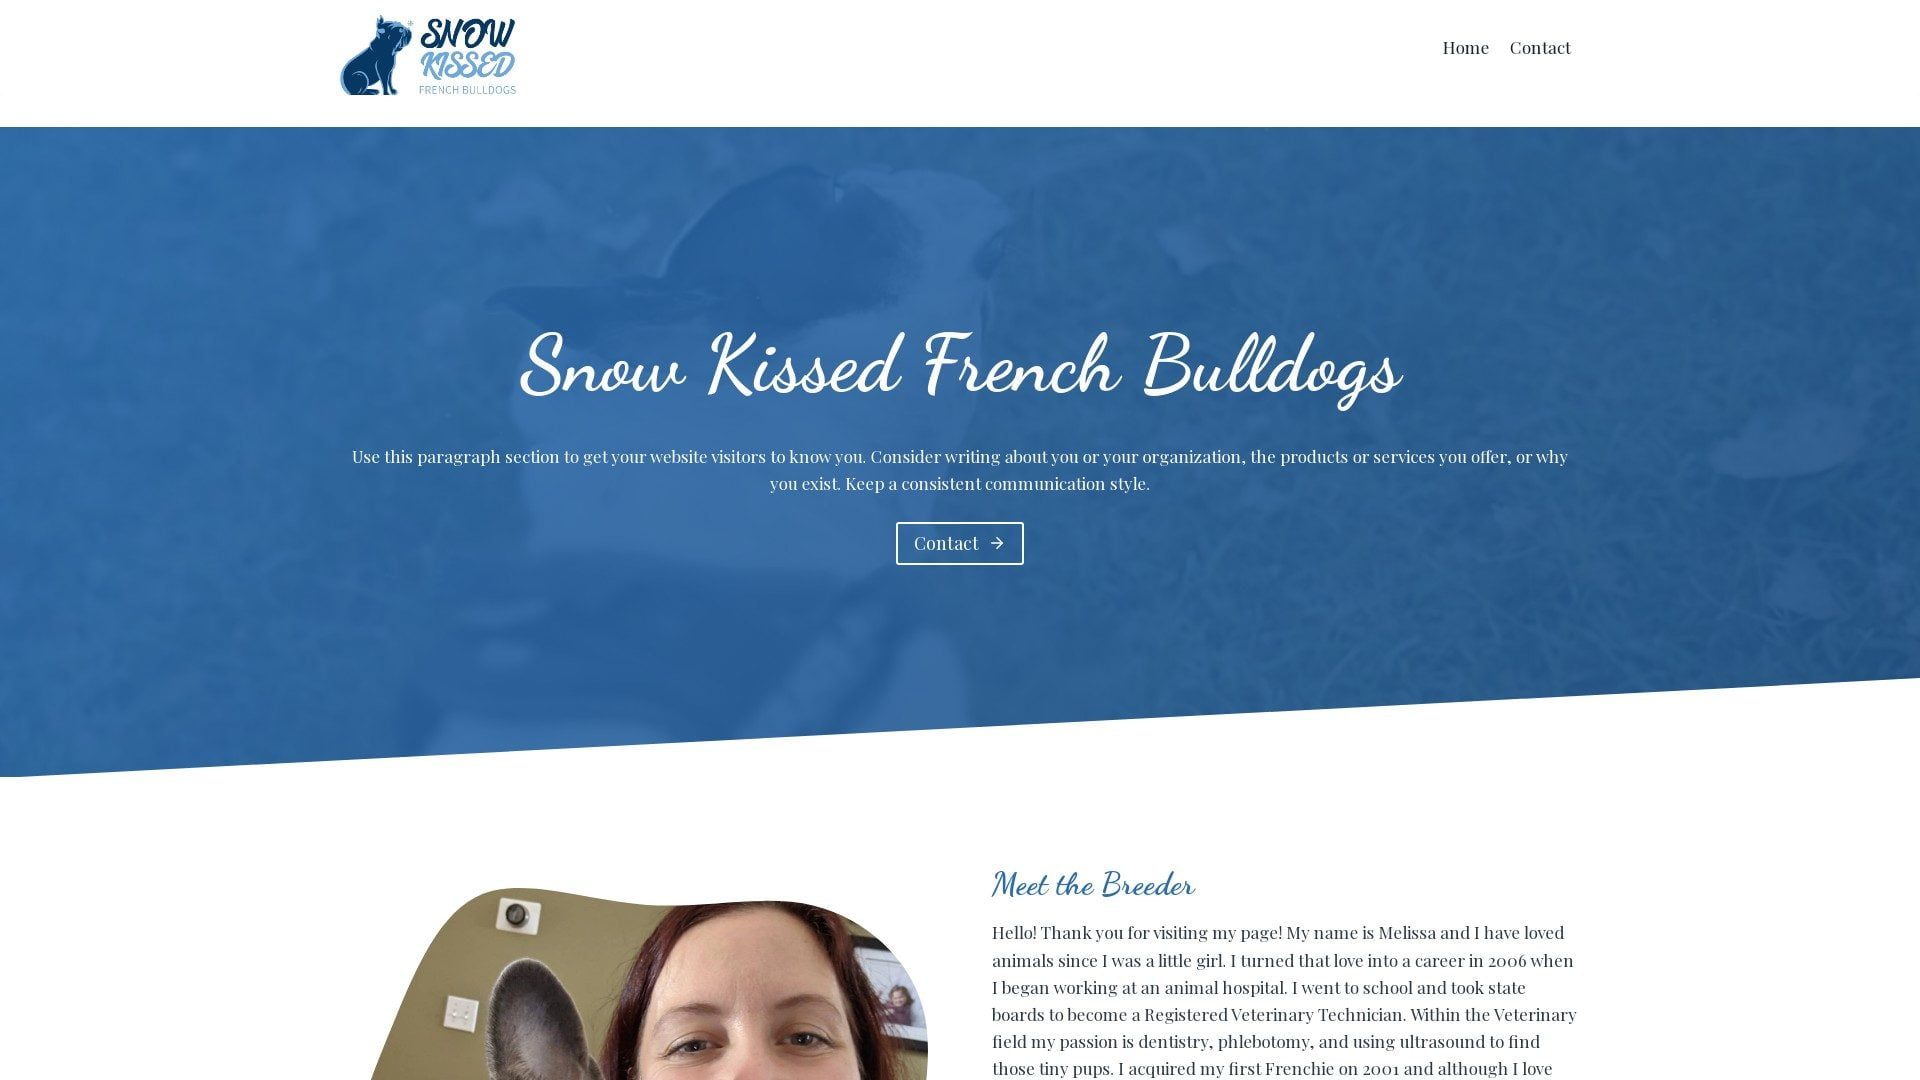 Snow Kissed – French Bulldogs